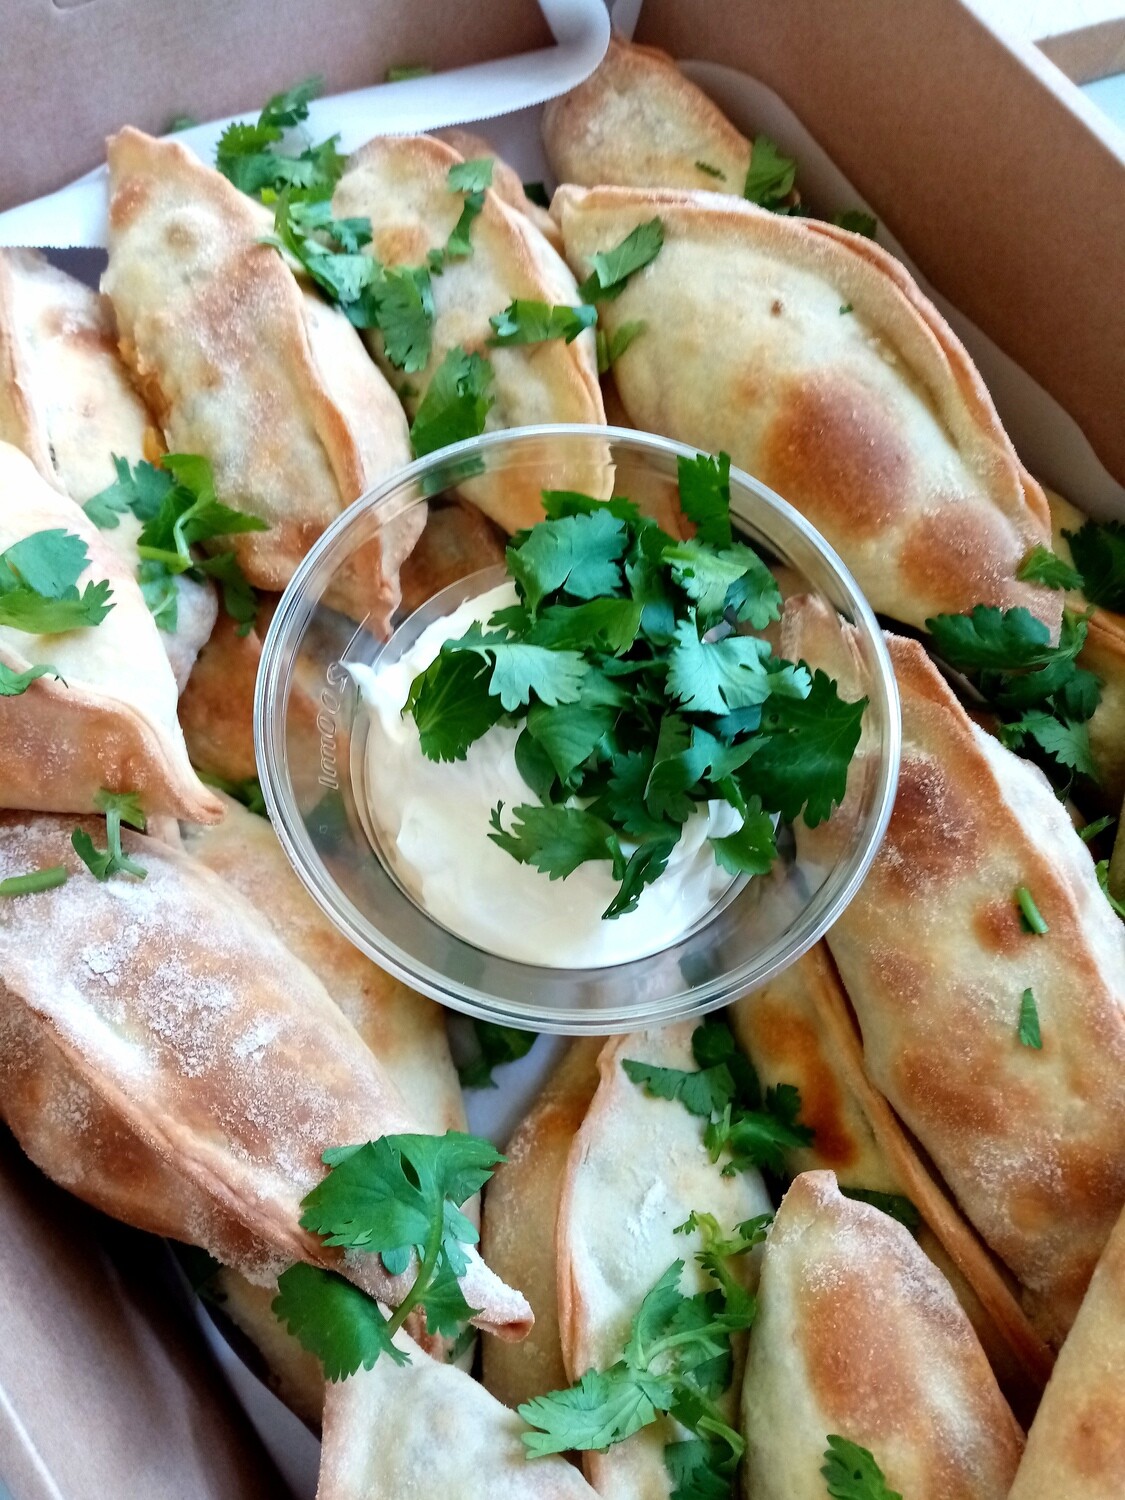 20x snack empanadas with beef or vegetarian filling, sour cream and coriander.